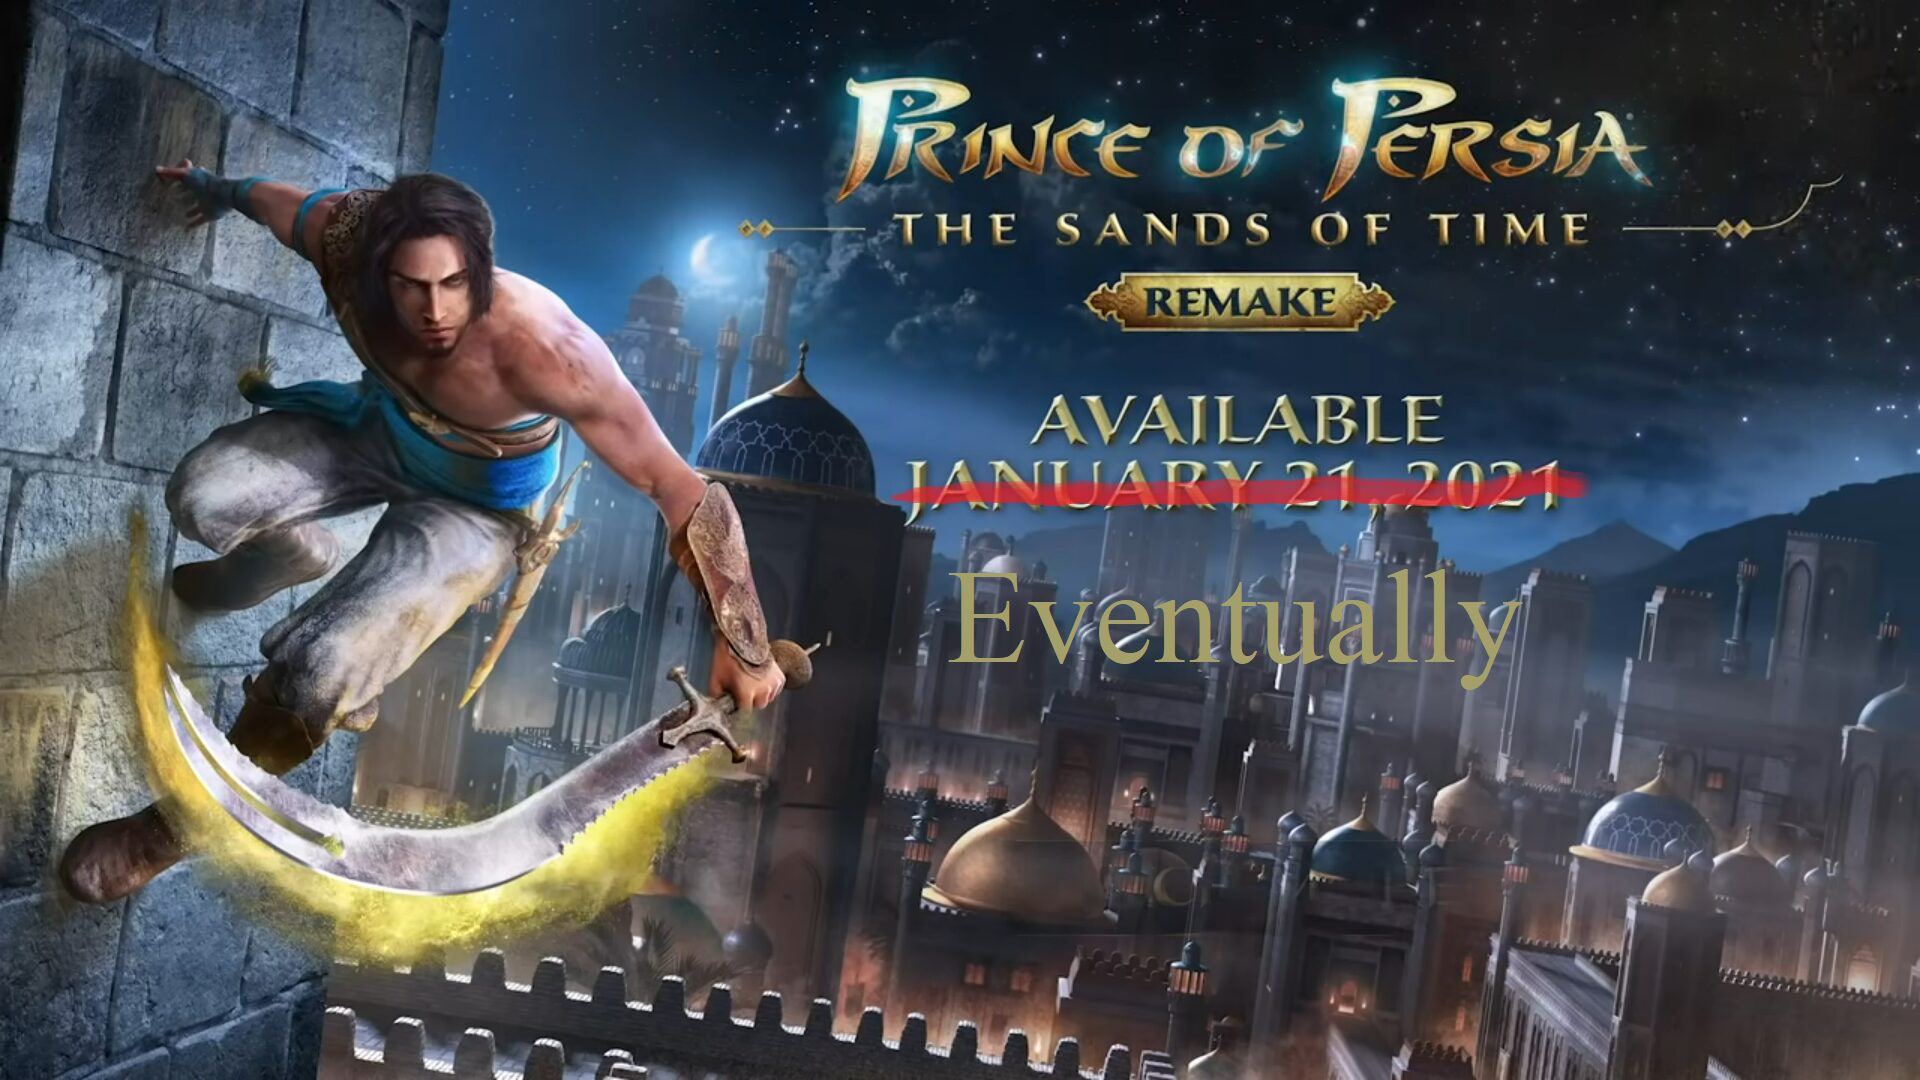 Prince Of Persia: The Sands Of Time Remake Got Shifted To New/Old Developers